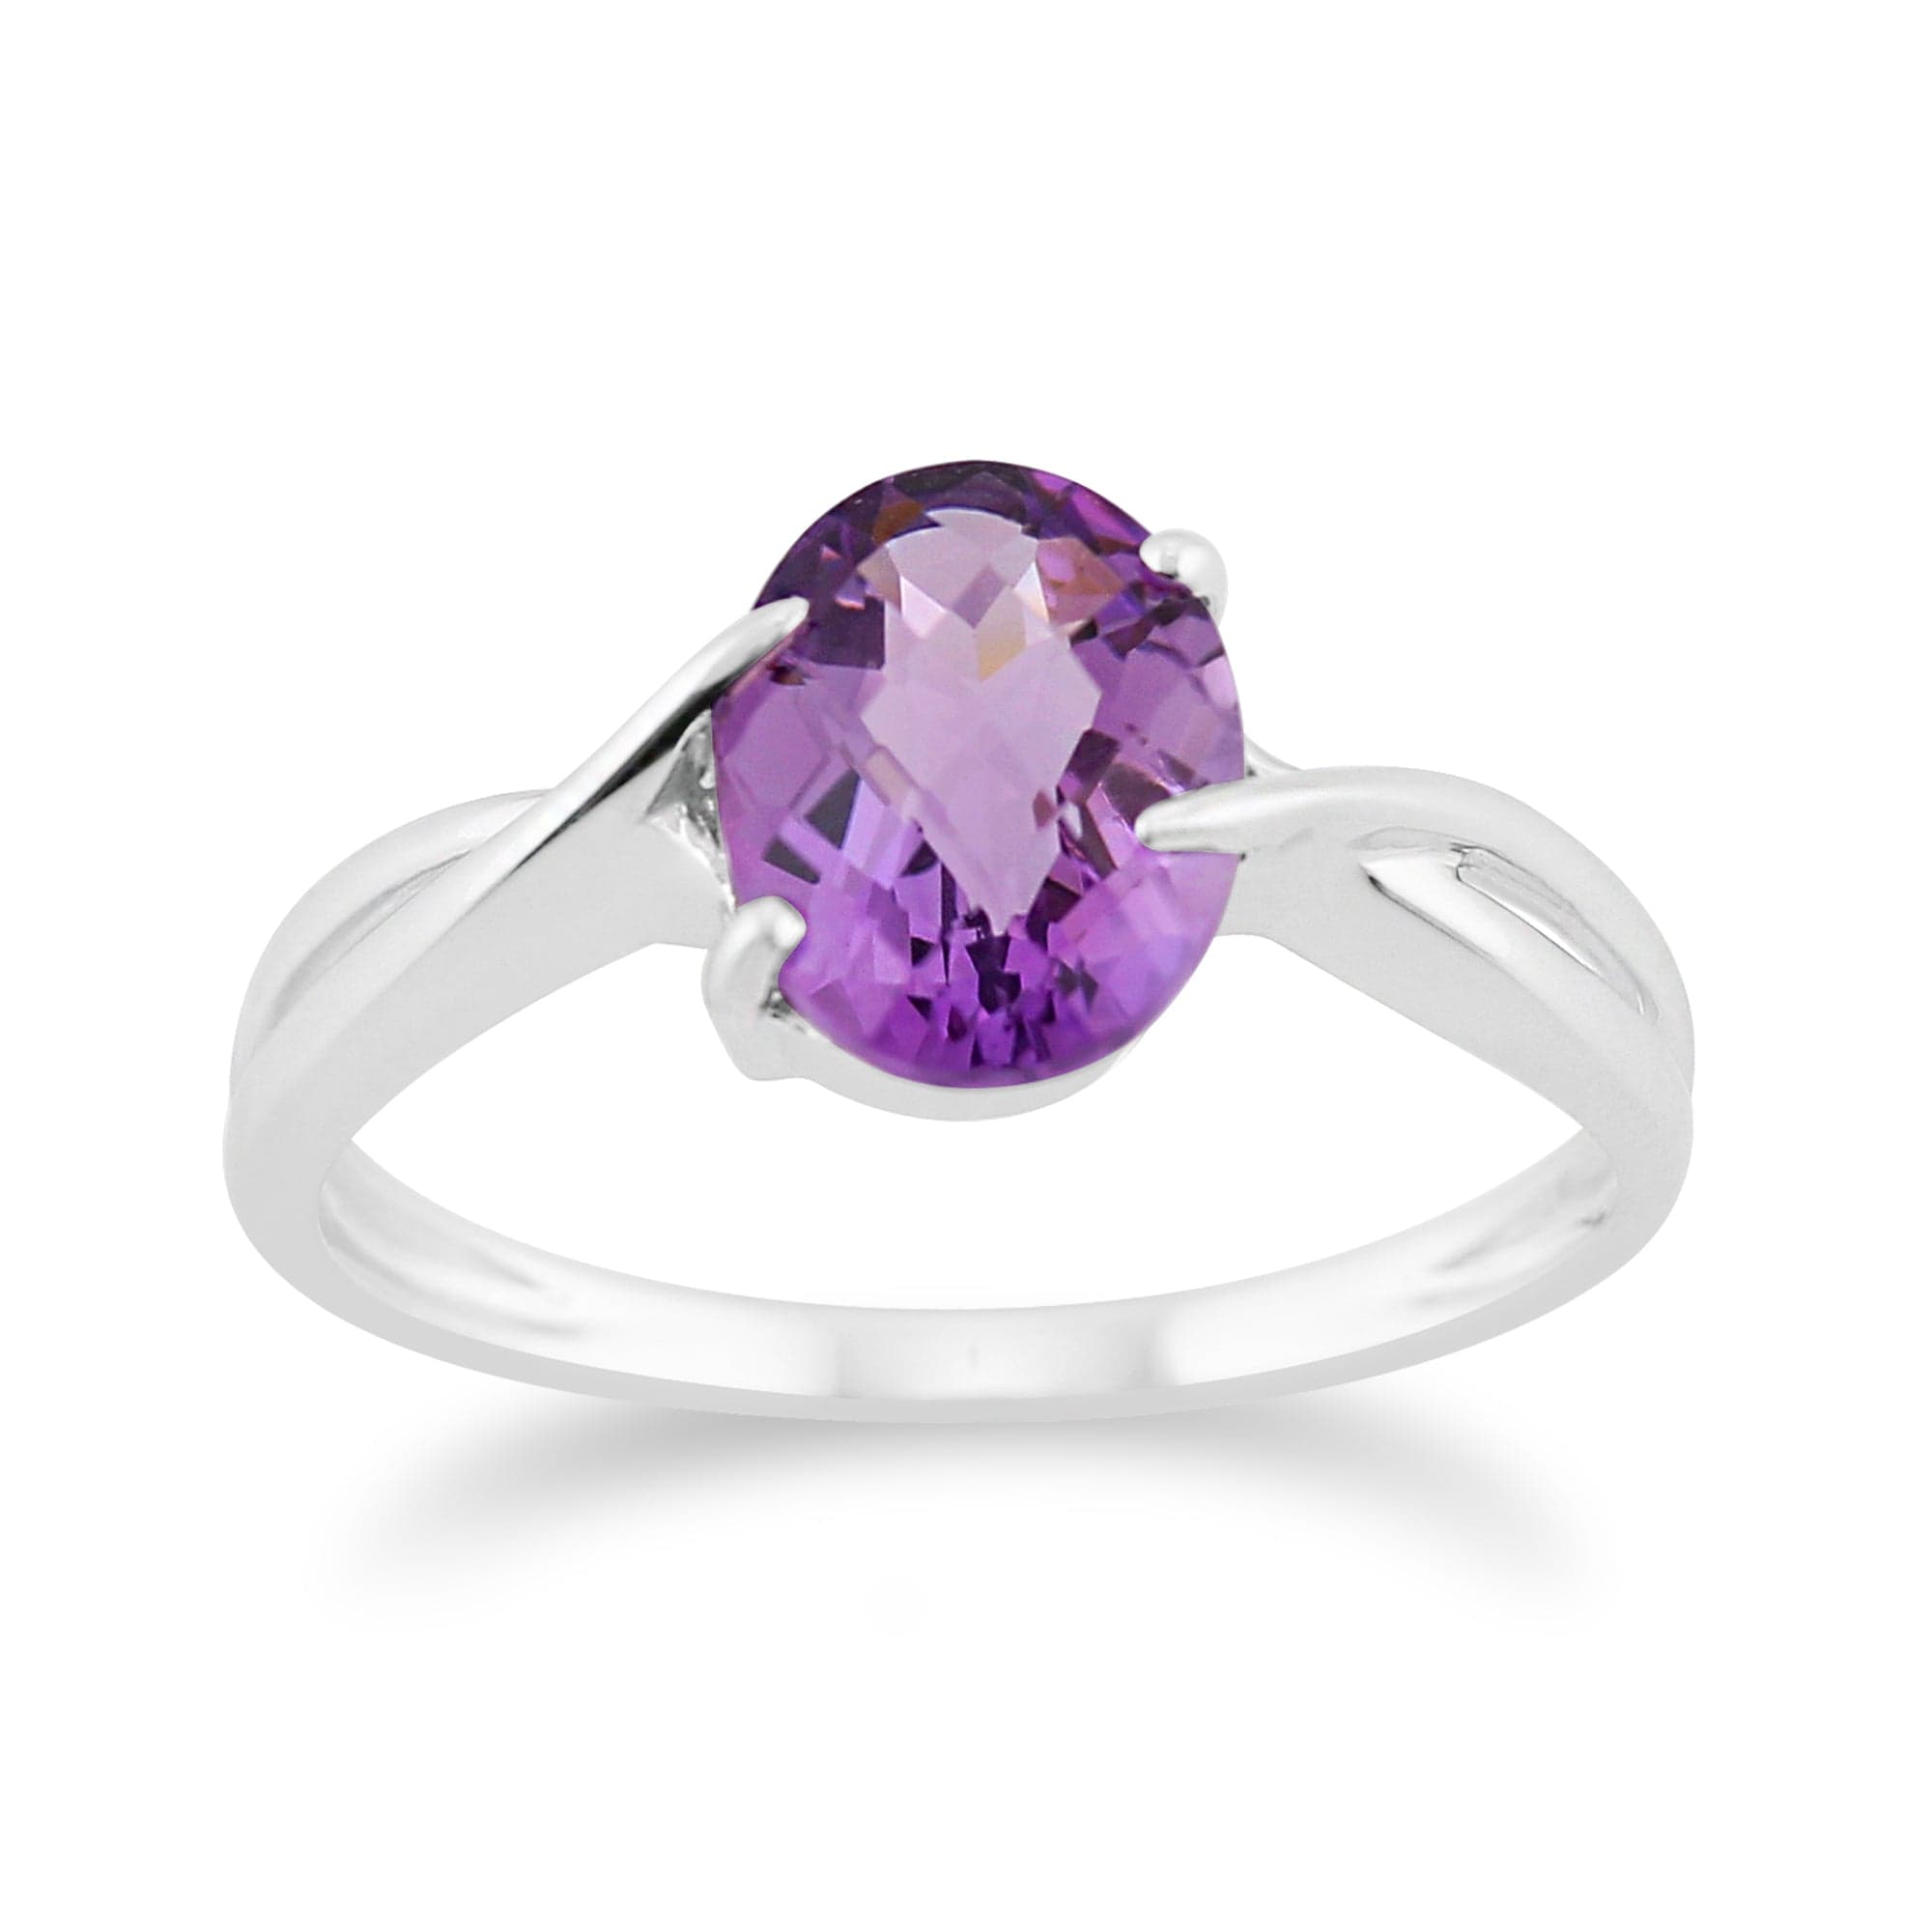 9ct White Gold 1.35ct Natural Amethyst Classic Single Stone Style Ring Image 1